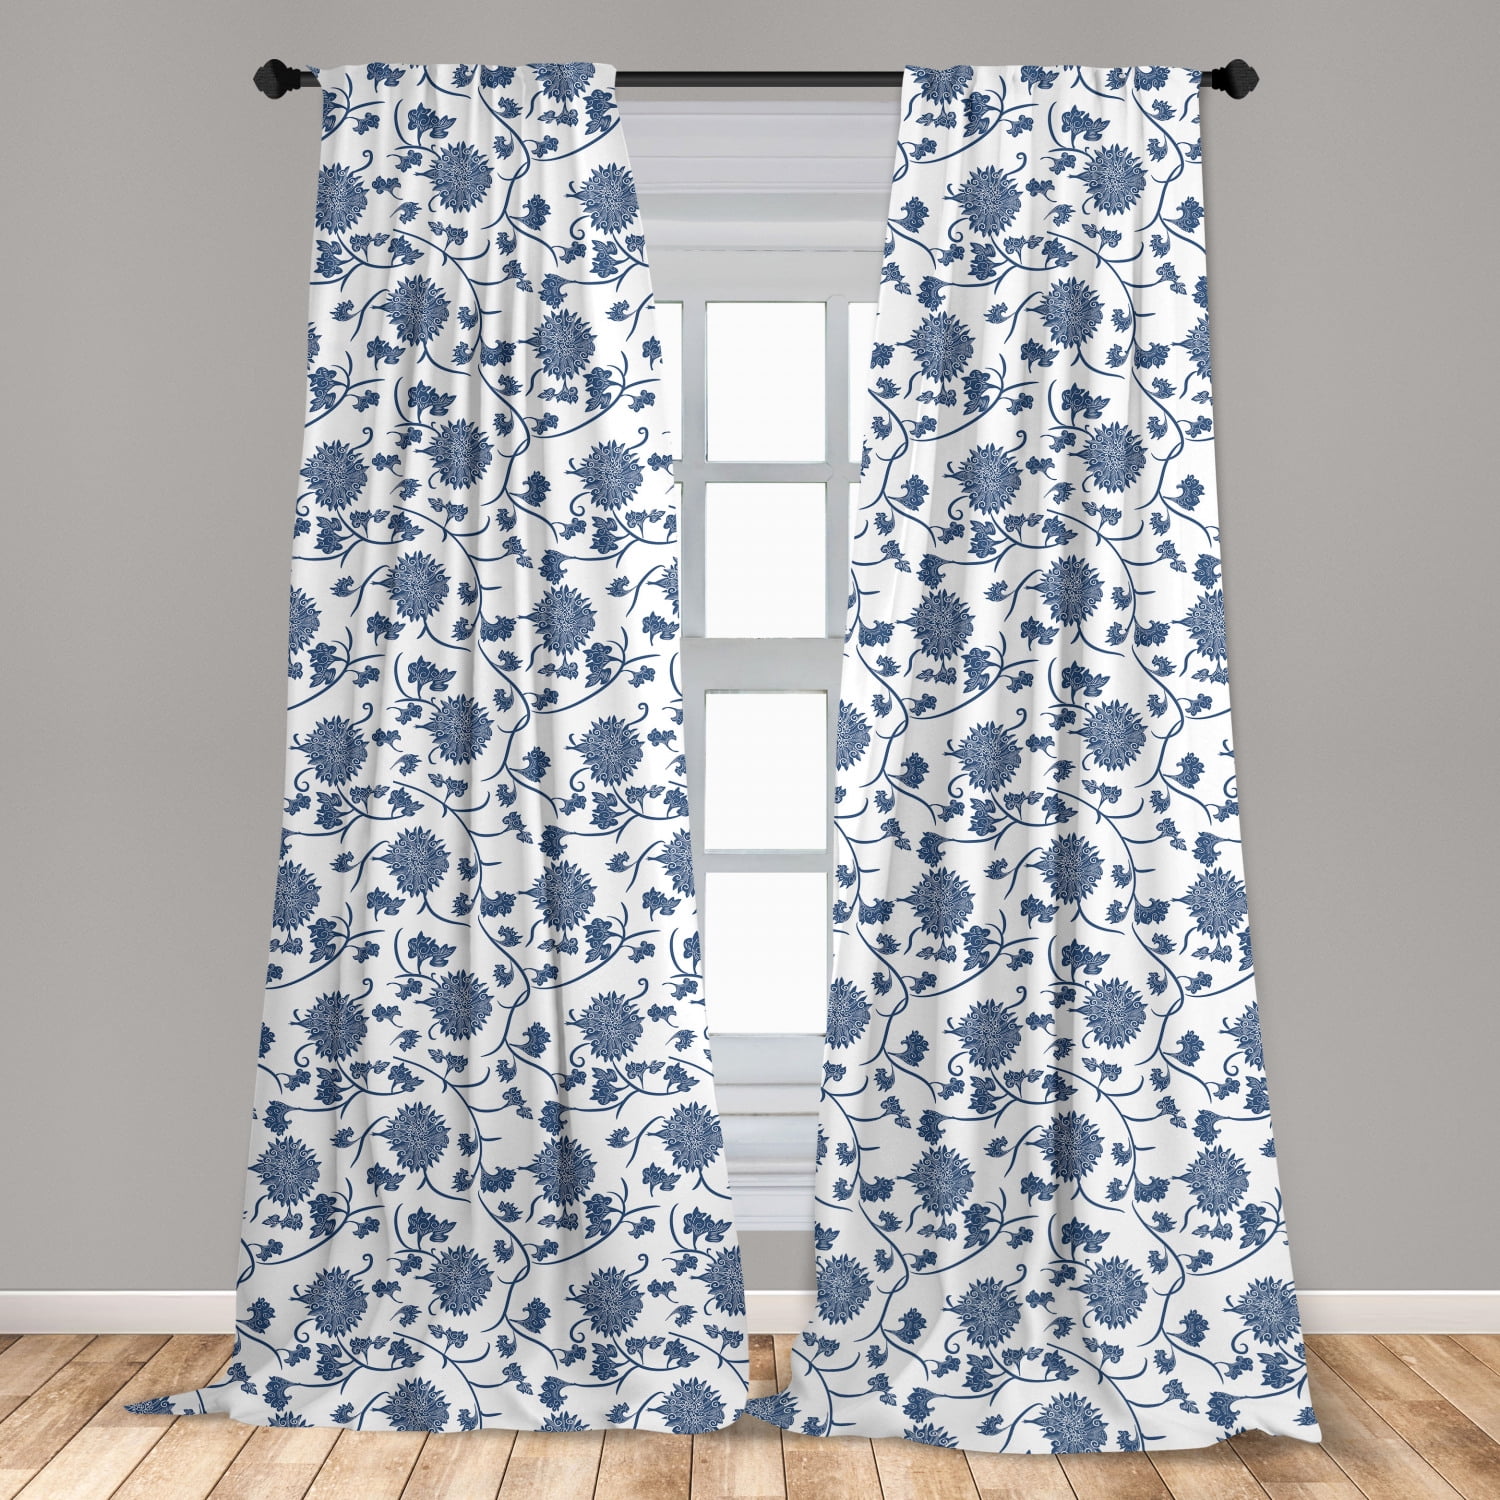 2 Panel 3D Widow Curtains Animal Printed Drapes for Bedroom Room Dividers 